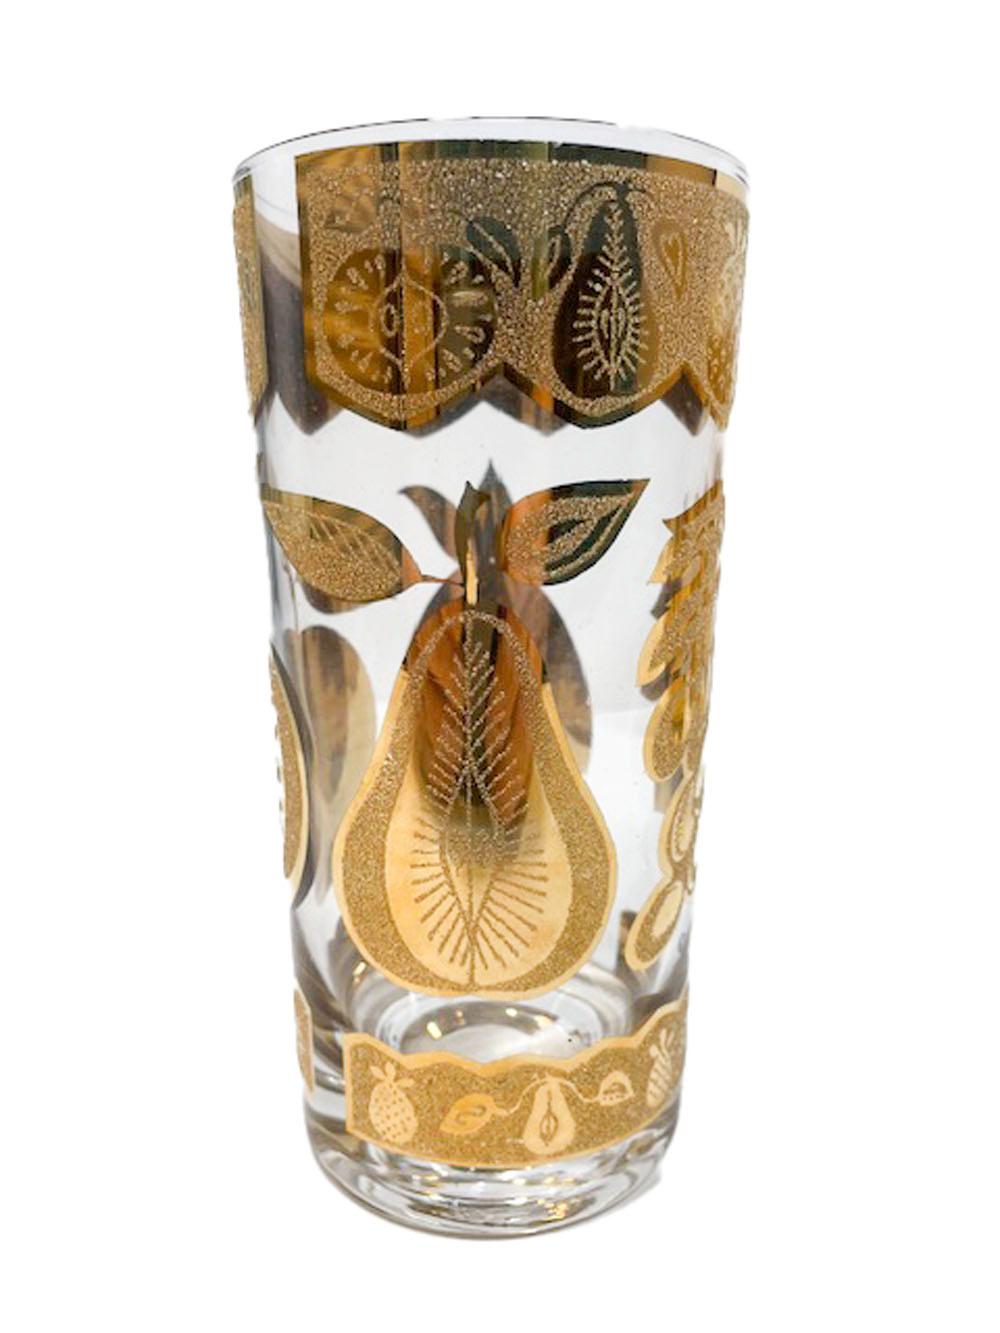 Set of eight Mid-Century Modern highball glasses by Culver in the Florentine pattern, decorated in smooth and textured 22k gold depicting apple, pear, pineapple and grapes.